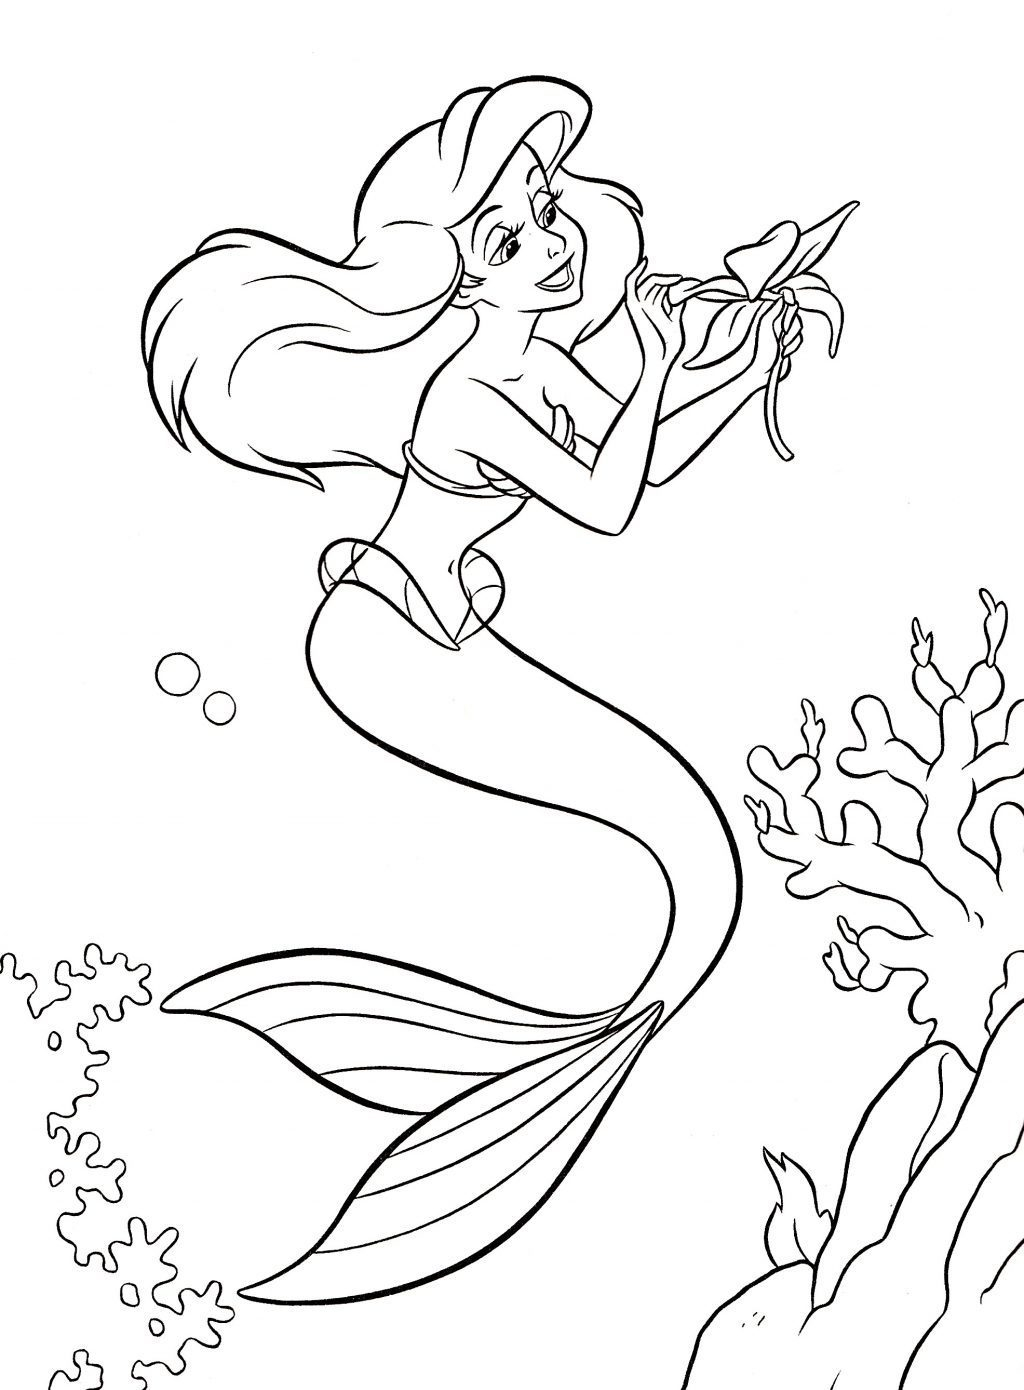 Coloring Pages Sun Coloring Pages Large Size Of Coloring Page Book Games Disney